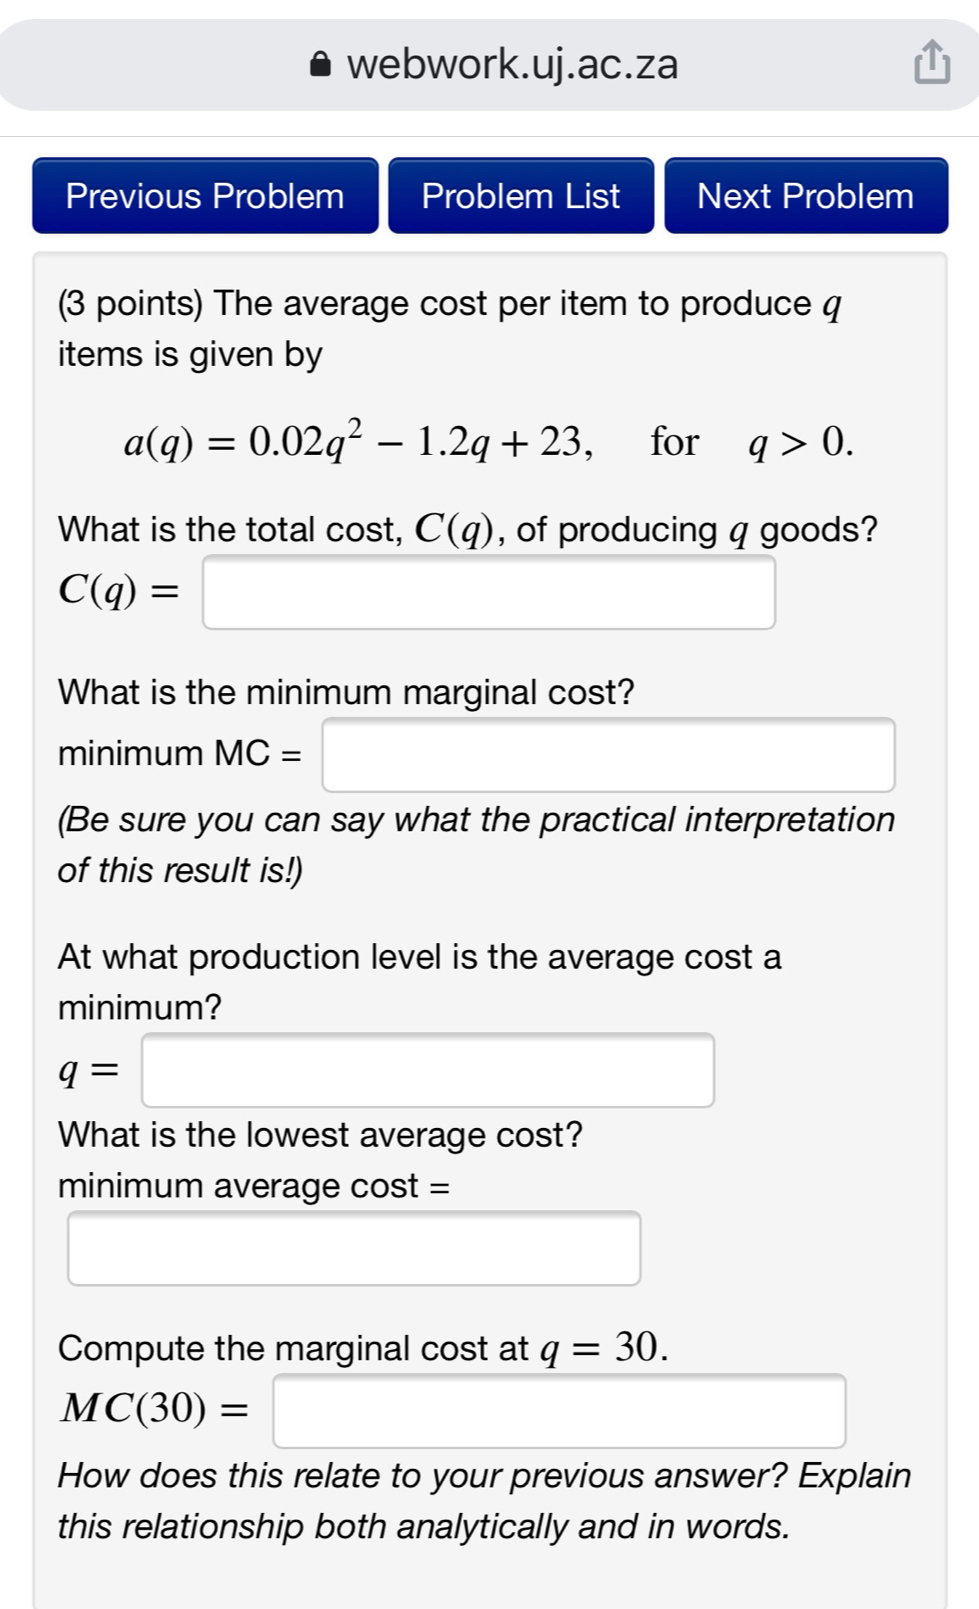 webwork.uj.ac.za Previous Problem Problem List Next Problem 3 points The average cost per item to produce q items is given by aq=0.02q2-1.2q+23 for q>0 What is the total cost, Cq , of producing q goods? Cq=-- What is the minimum marginal cost? minimum MC= .. Be sure you can say what the practical interpretation of this result is! At what production level is the average cost a minimum? q= ... What is the lowest average cost? minimum average cos t= ..................................................................................... Compute the marginal cost at q=30 MC30=...... How does this relate to your previous answer? Explain this relationship both analytically and in words.